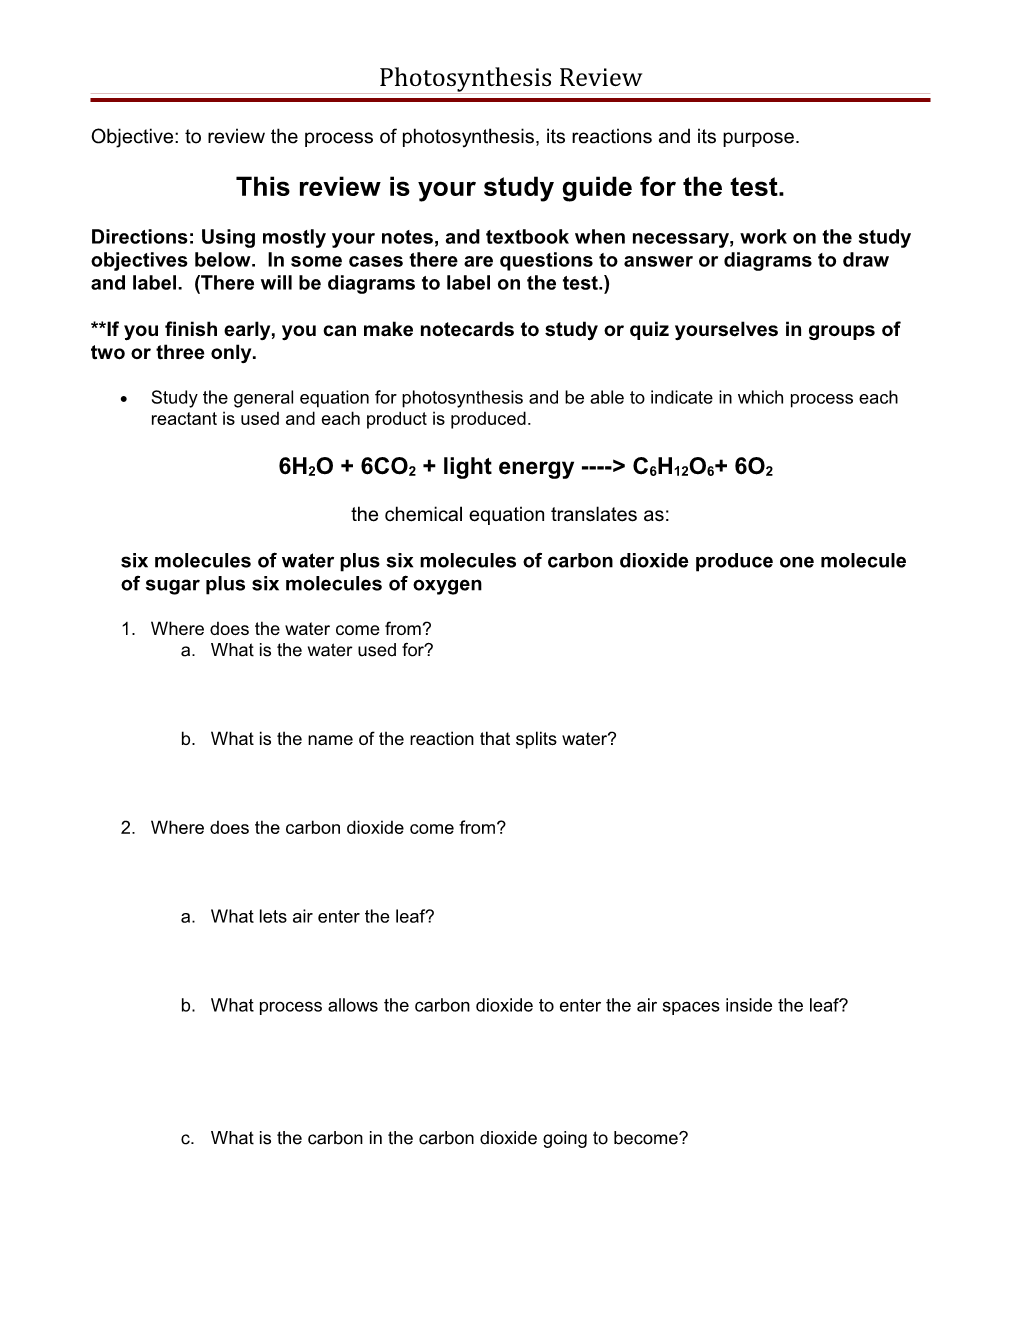 This Review Is Your Study Guide for the Test